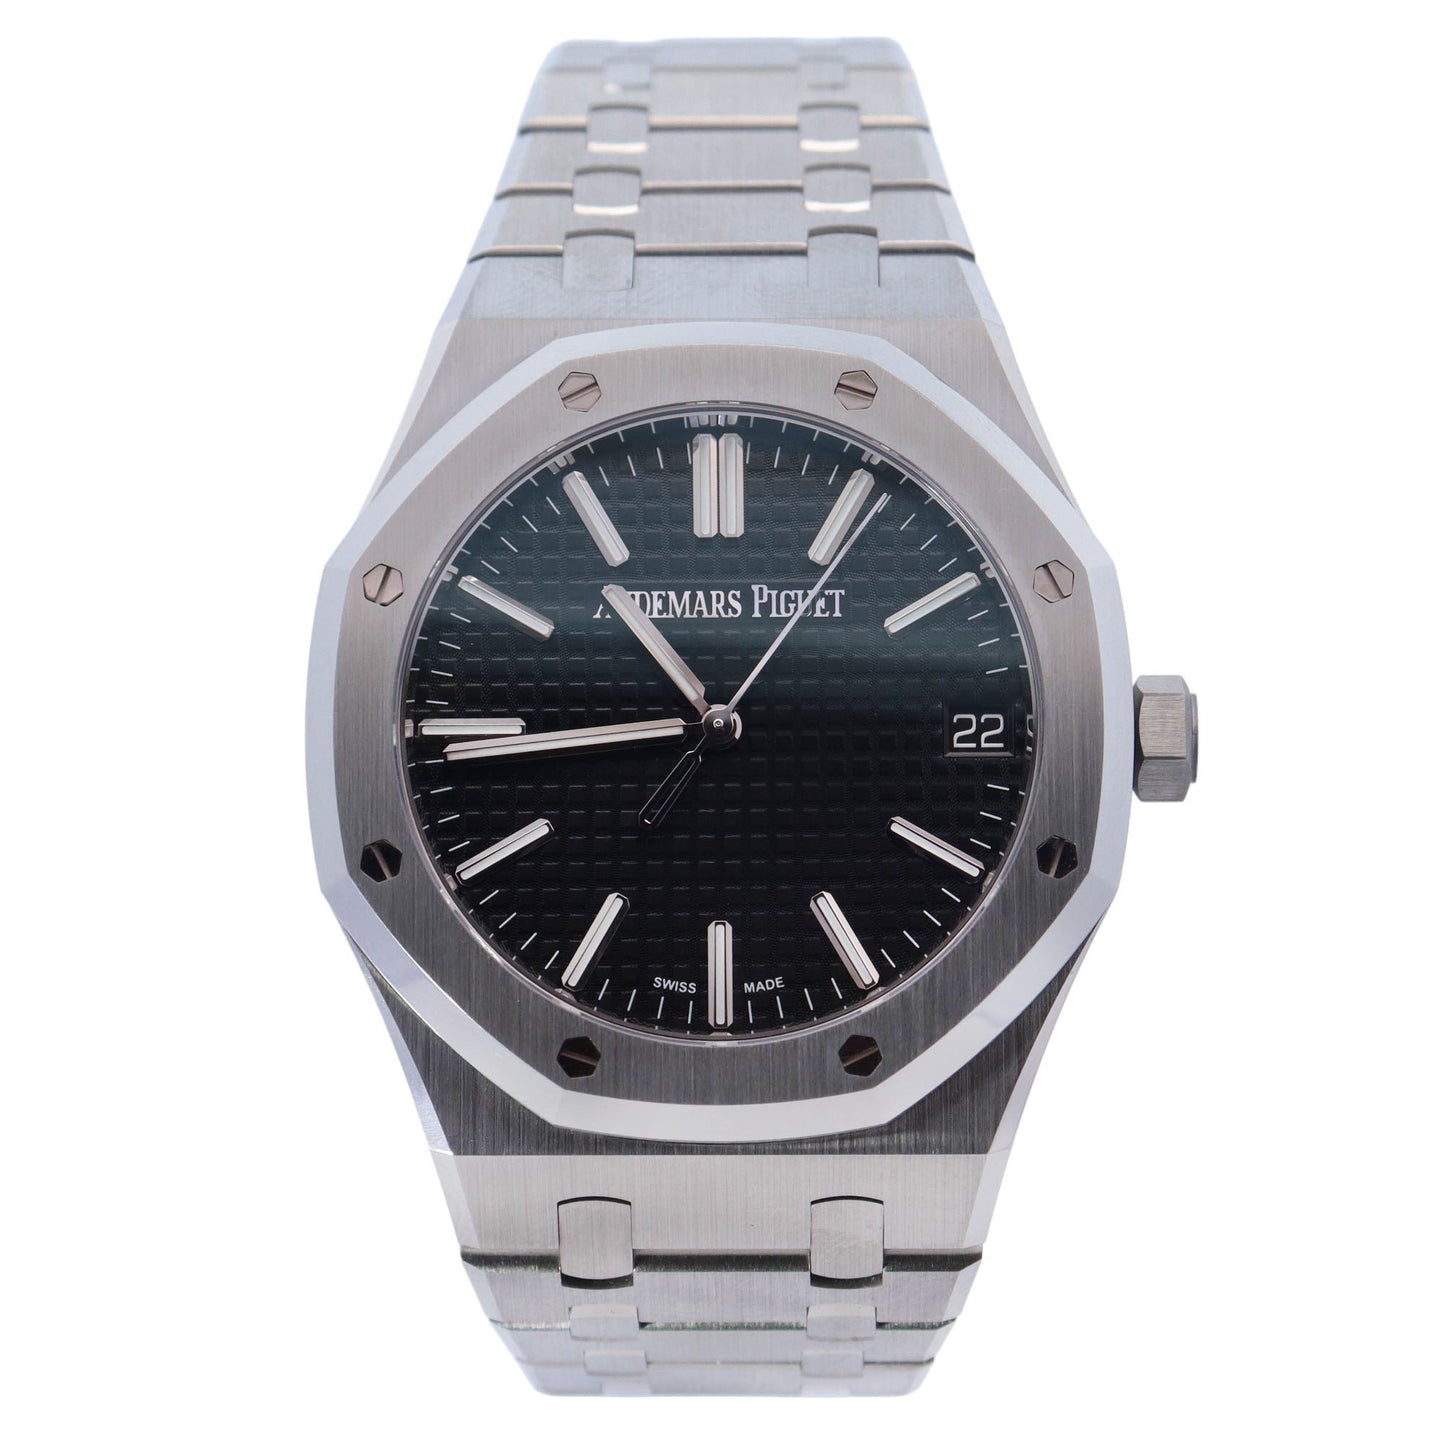 Audemars Piguet  Royal Oak Stainless Steel 41mm Black Stick Dial Watch Reference# 15510ST.OO.1320ST.07